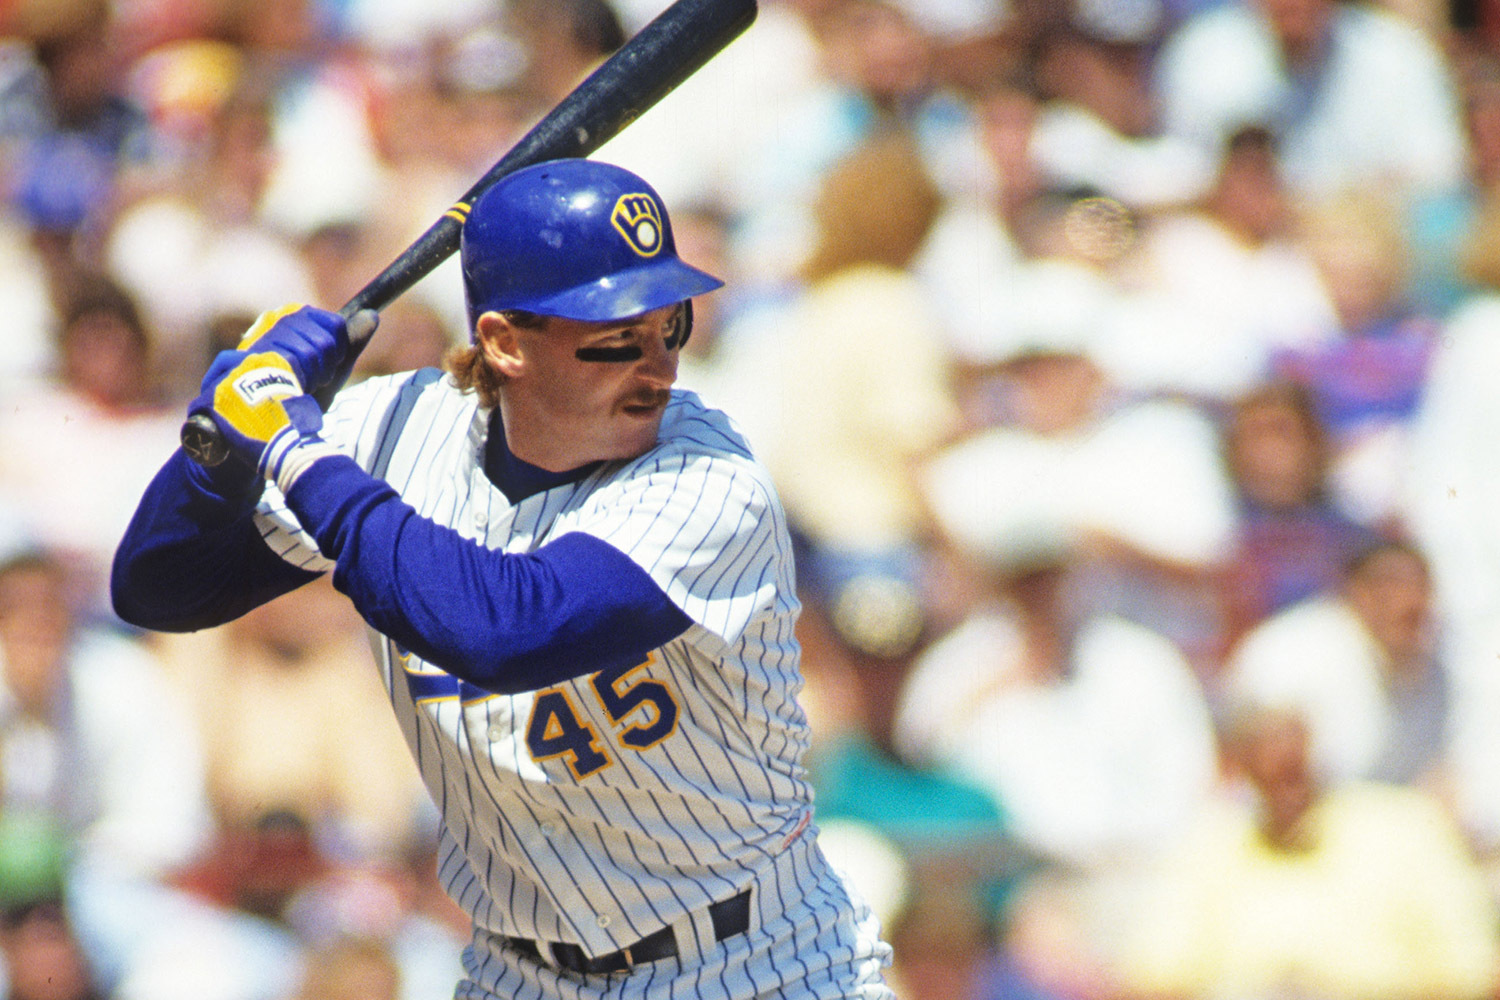 Drafting Prince Fielder 20 years ago paid off nicely for the Brewers